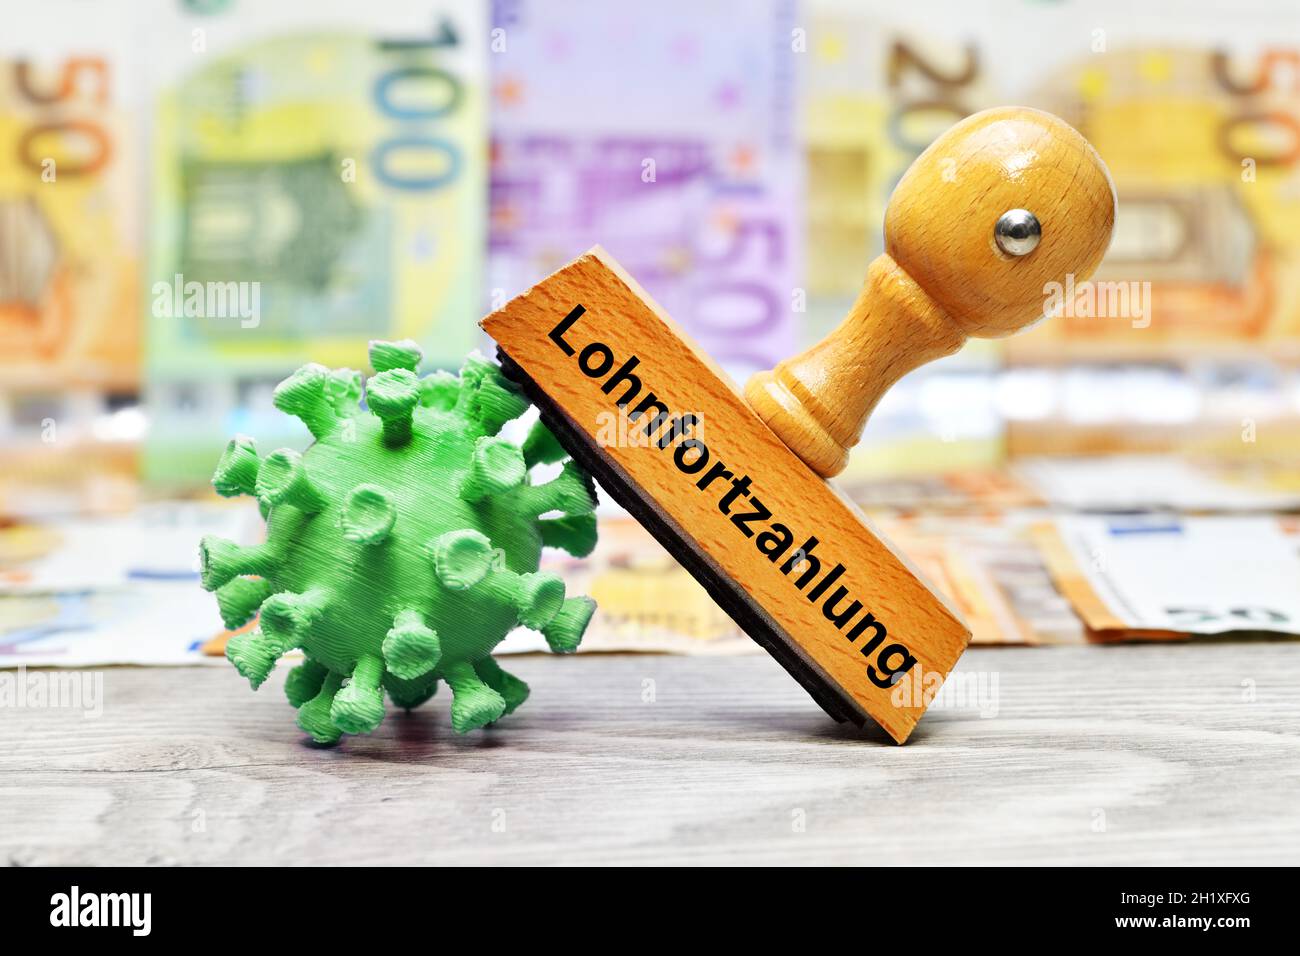 German Word For Continued Payment Of Wages On Stamp Next To Coronavirus Model Stock Photo